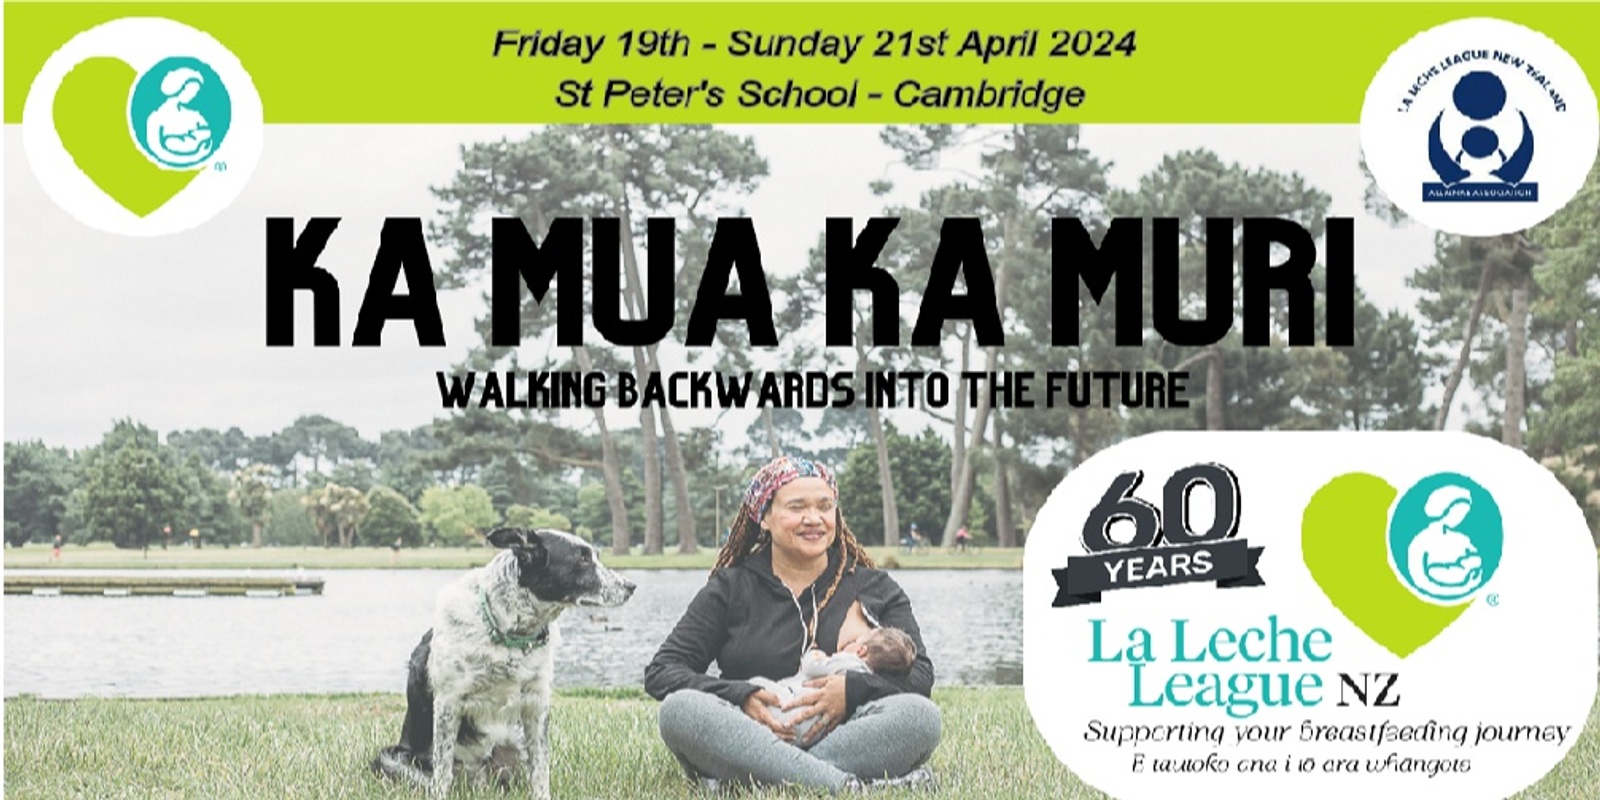 Banner image for La Leche League NZ Conference 2024 - Celebrating 60 years of Breastfeeding Support in Aotearoa